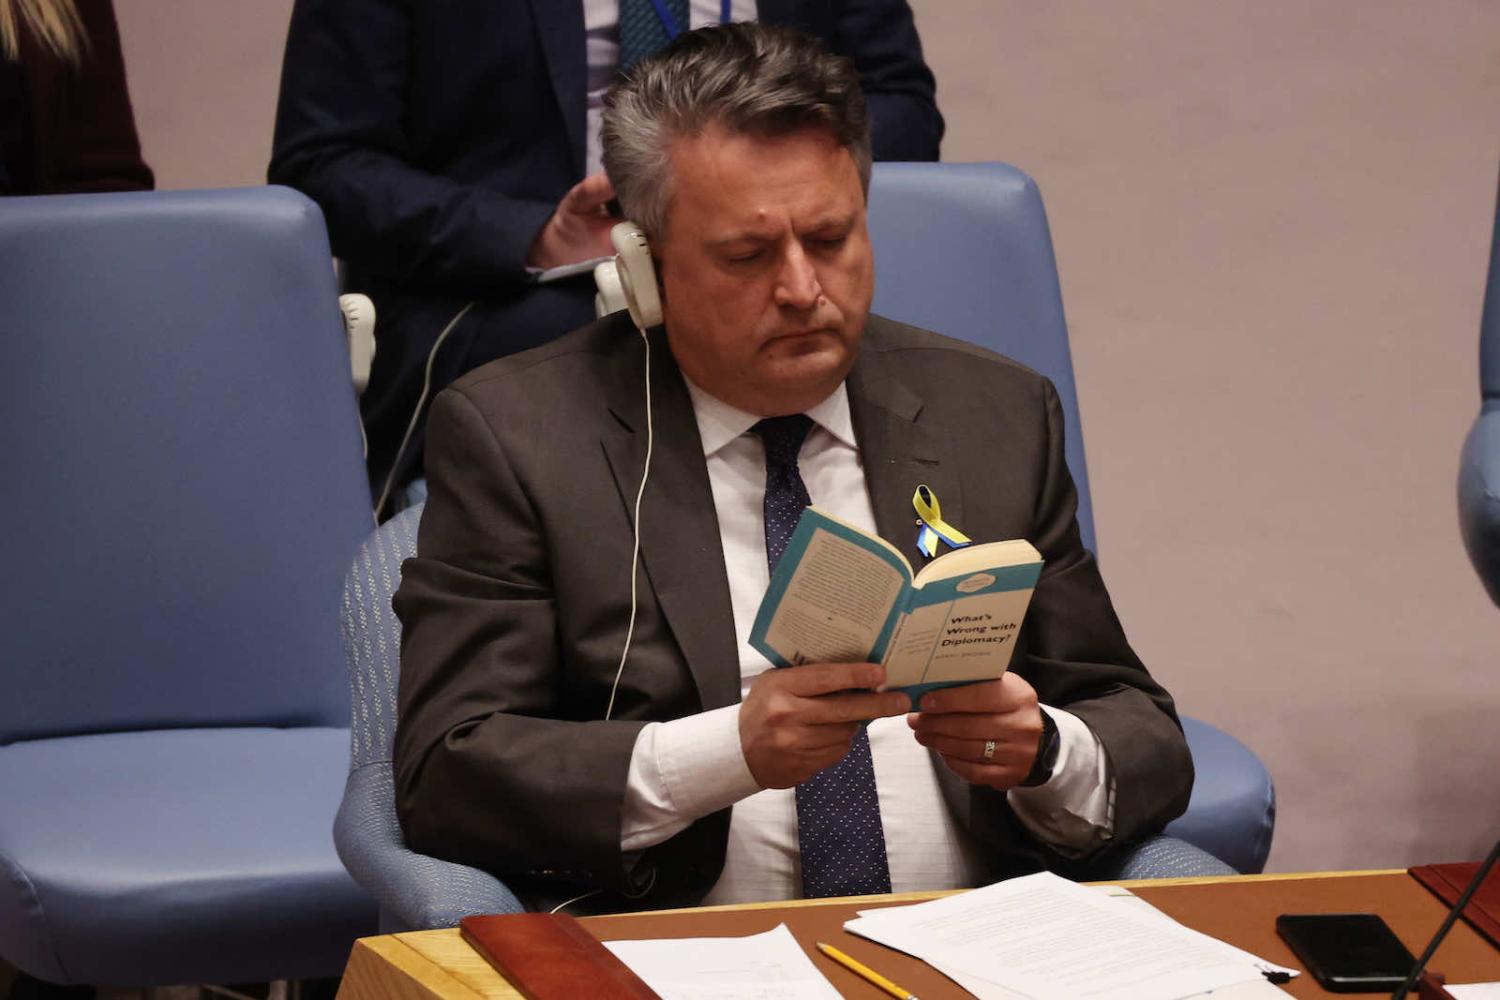 Ukraine ambassador Sergiy Kyslytsya reads the book “What's Wrong With Diplomacy?” by Kerry Brown as Russia’s ambassador speaks at the UN Security Council on 29 March (Spencer Platt/Getty Images)